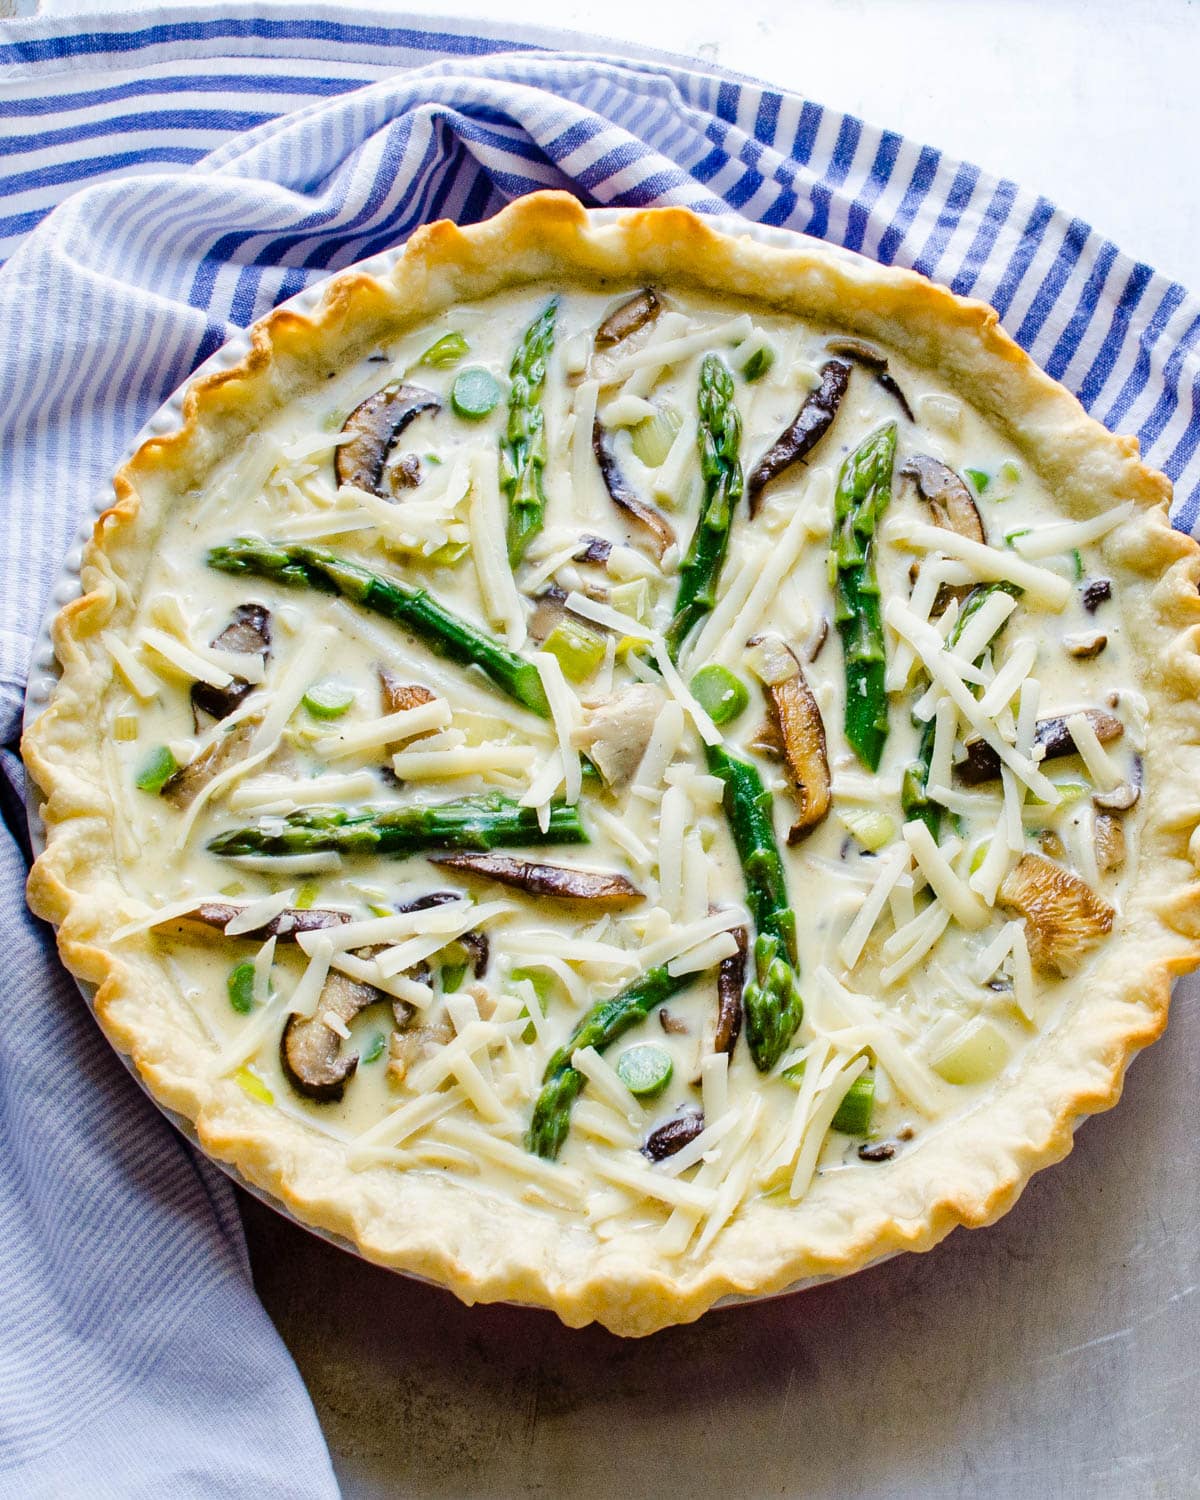 Filling the crust with the egg custard and arranging asparagus spears on top.